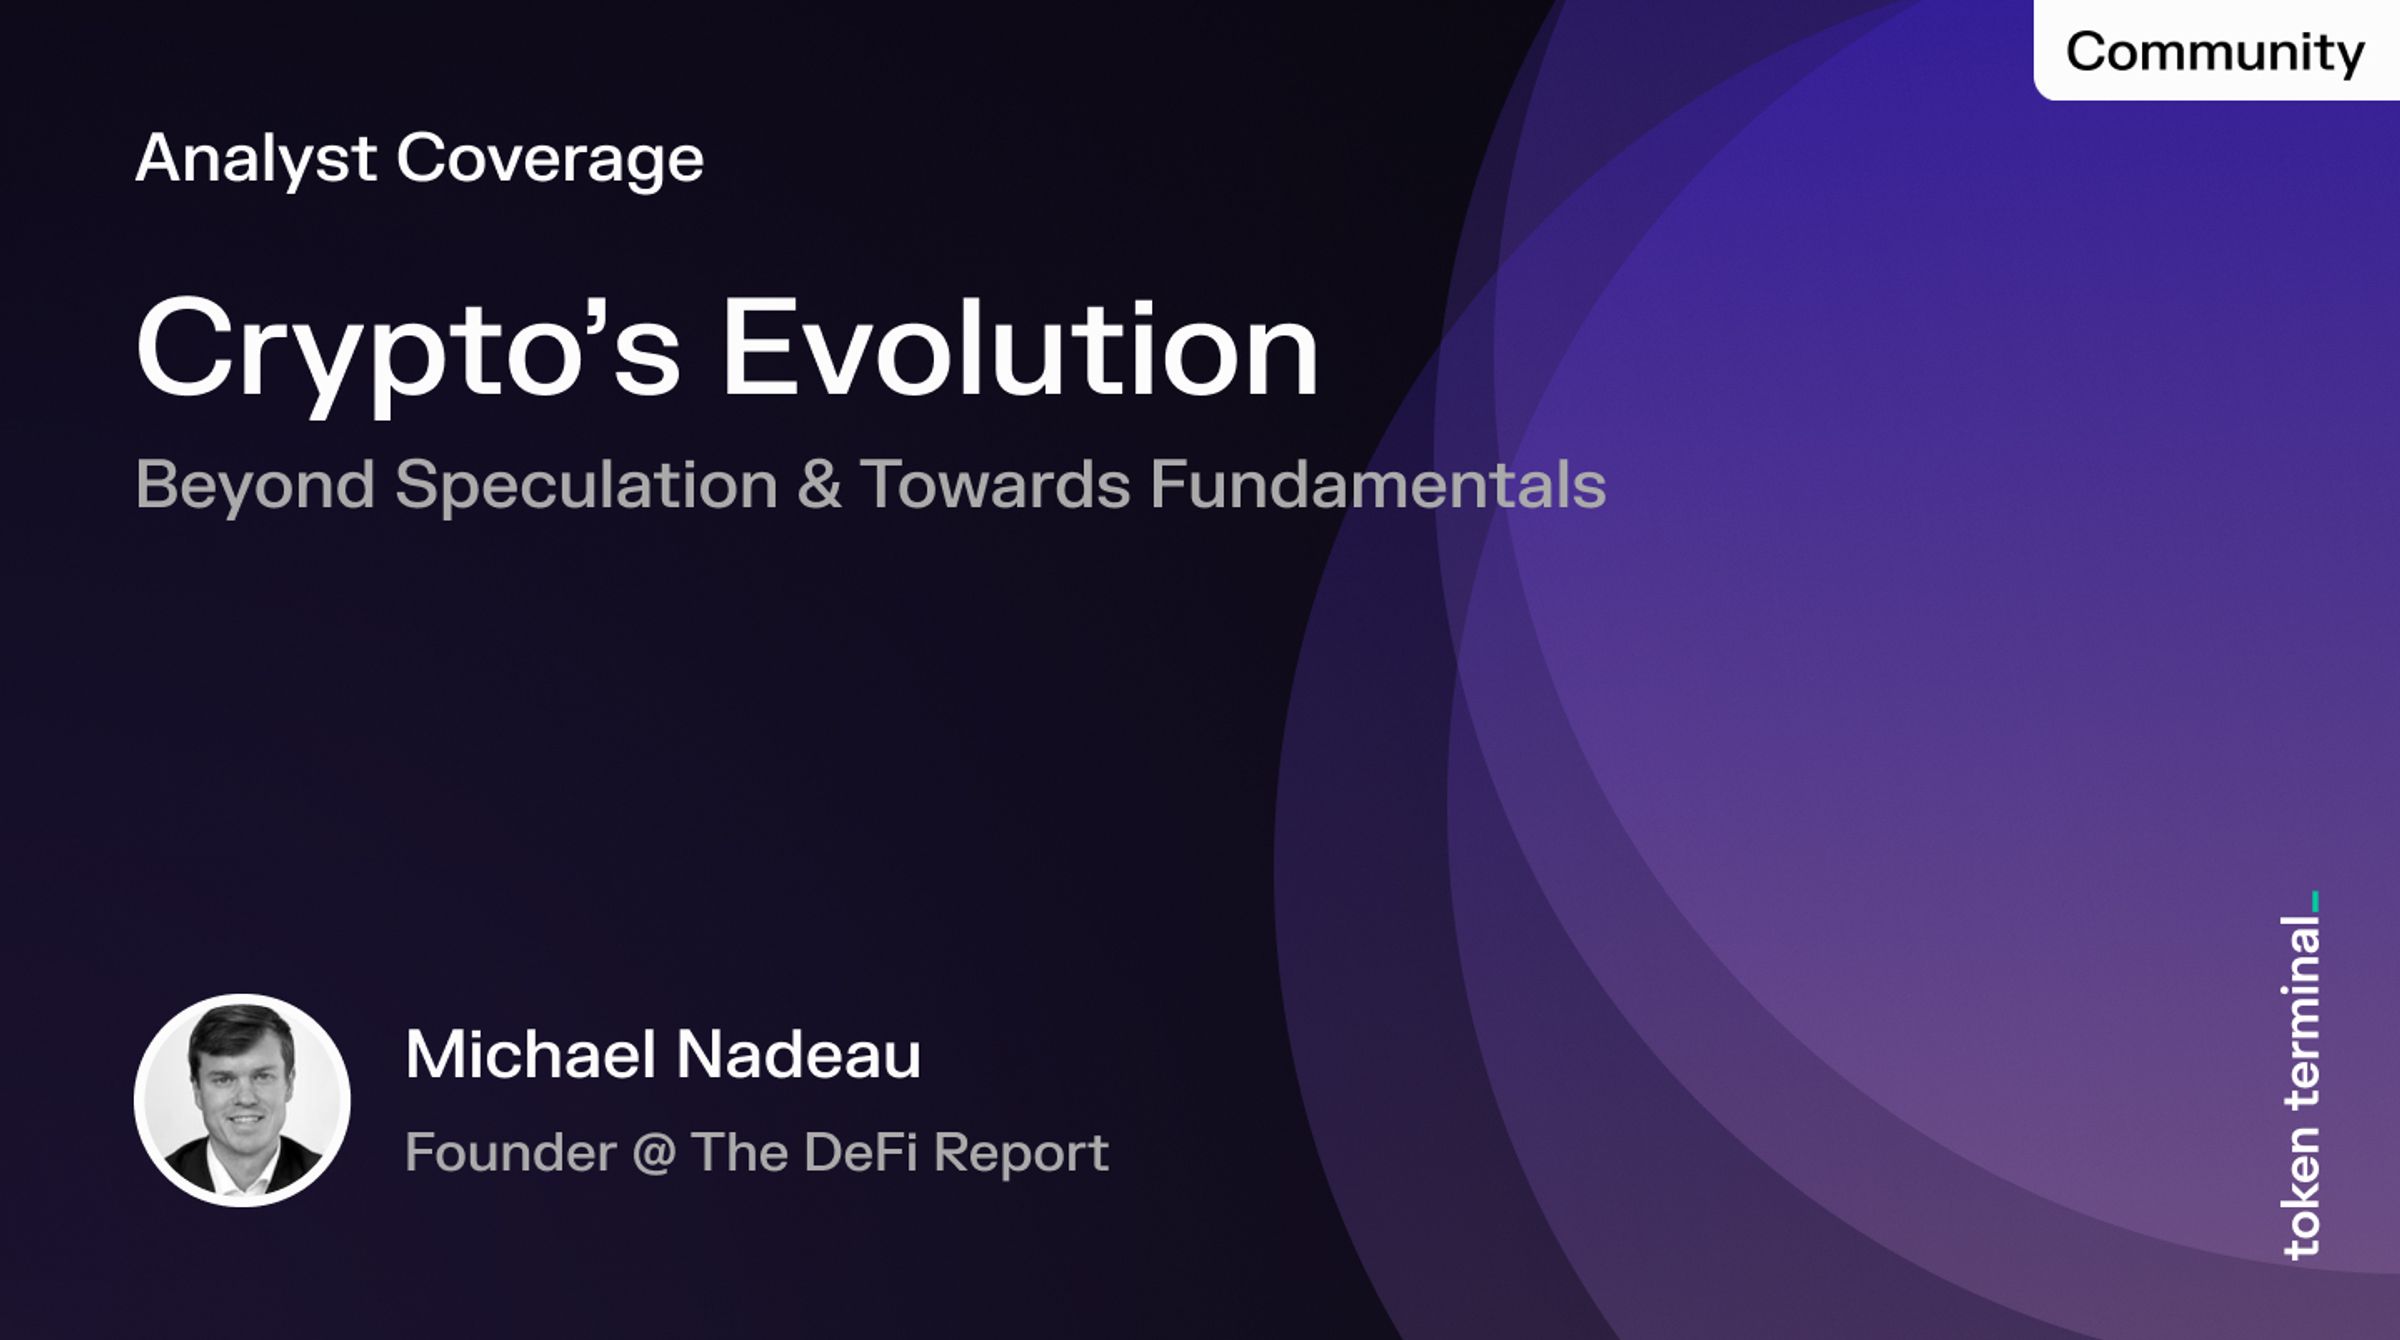 Crypto's evolution: beyond speculation and towards fundamentals